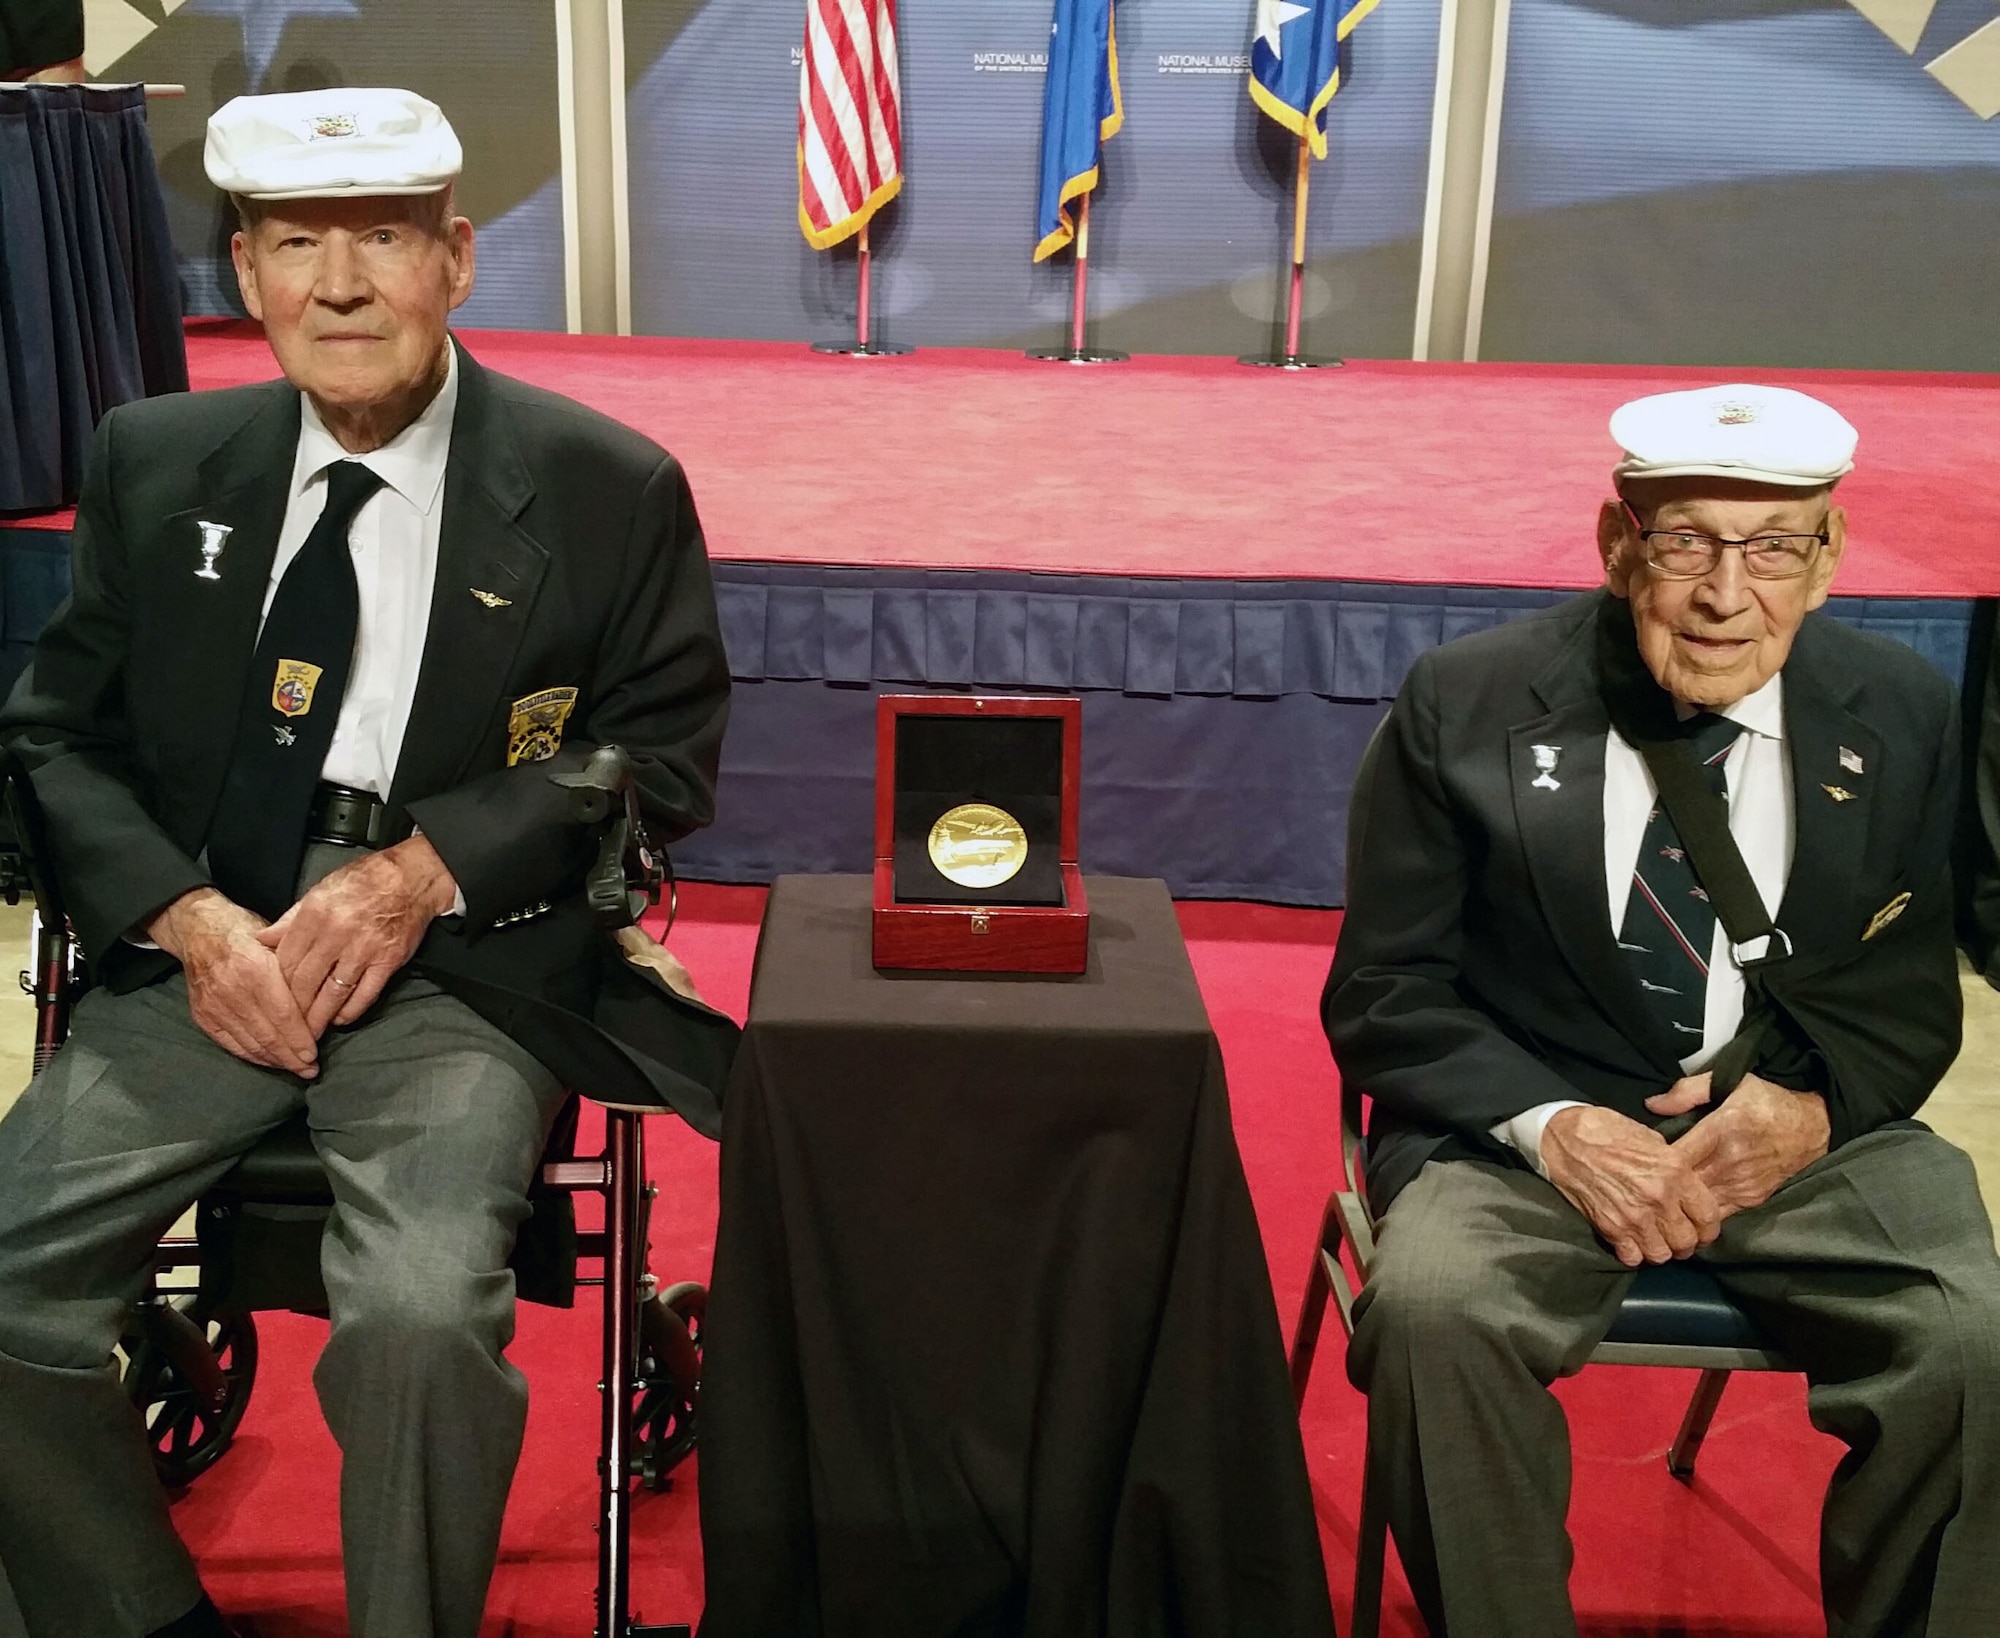 Doolittle Raiders retired Lt. Col. Richard Cole, co-pilot of Crew No. 1, and former Staff Sgt. David Thatcher, engineer-gunner of Crew No. 7, sit with the Congressional Gold Medal during a ceremony at Wright-Patterson Air Force Base, Ohio, April 18, 2015. The medal is on display in the museum’s World War II Gallery in the Doolittle Raid exhibit. (U.S. Air Force courtesy photo)